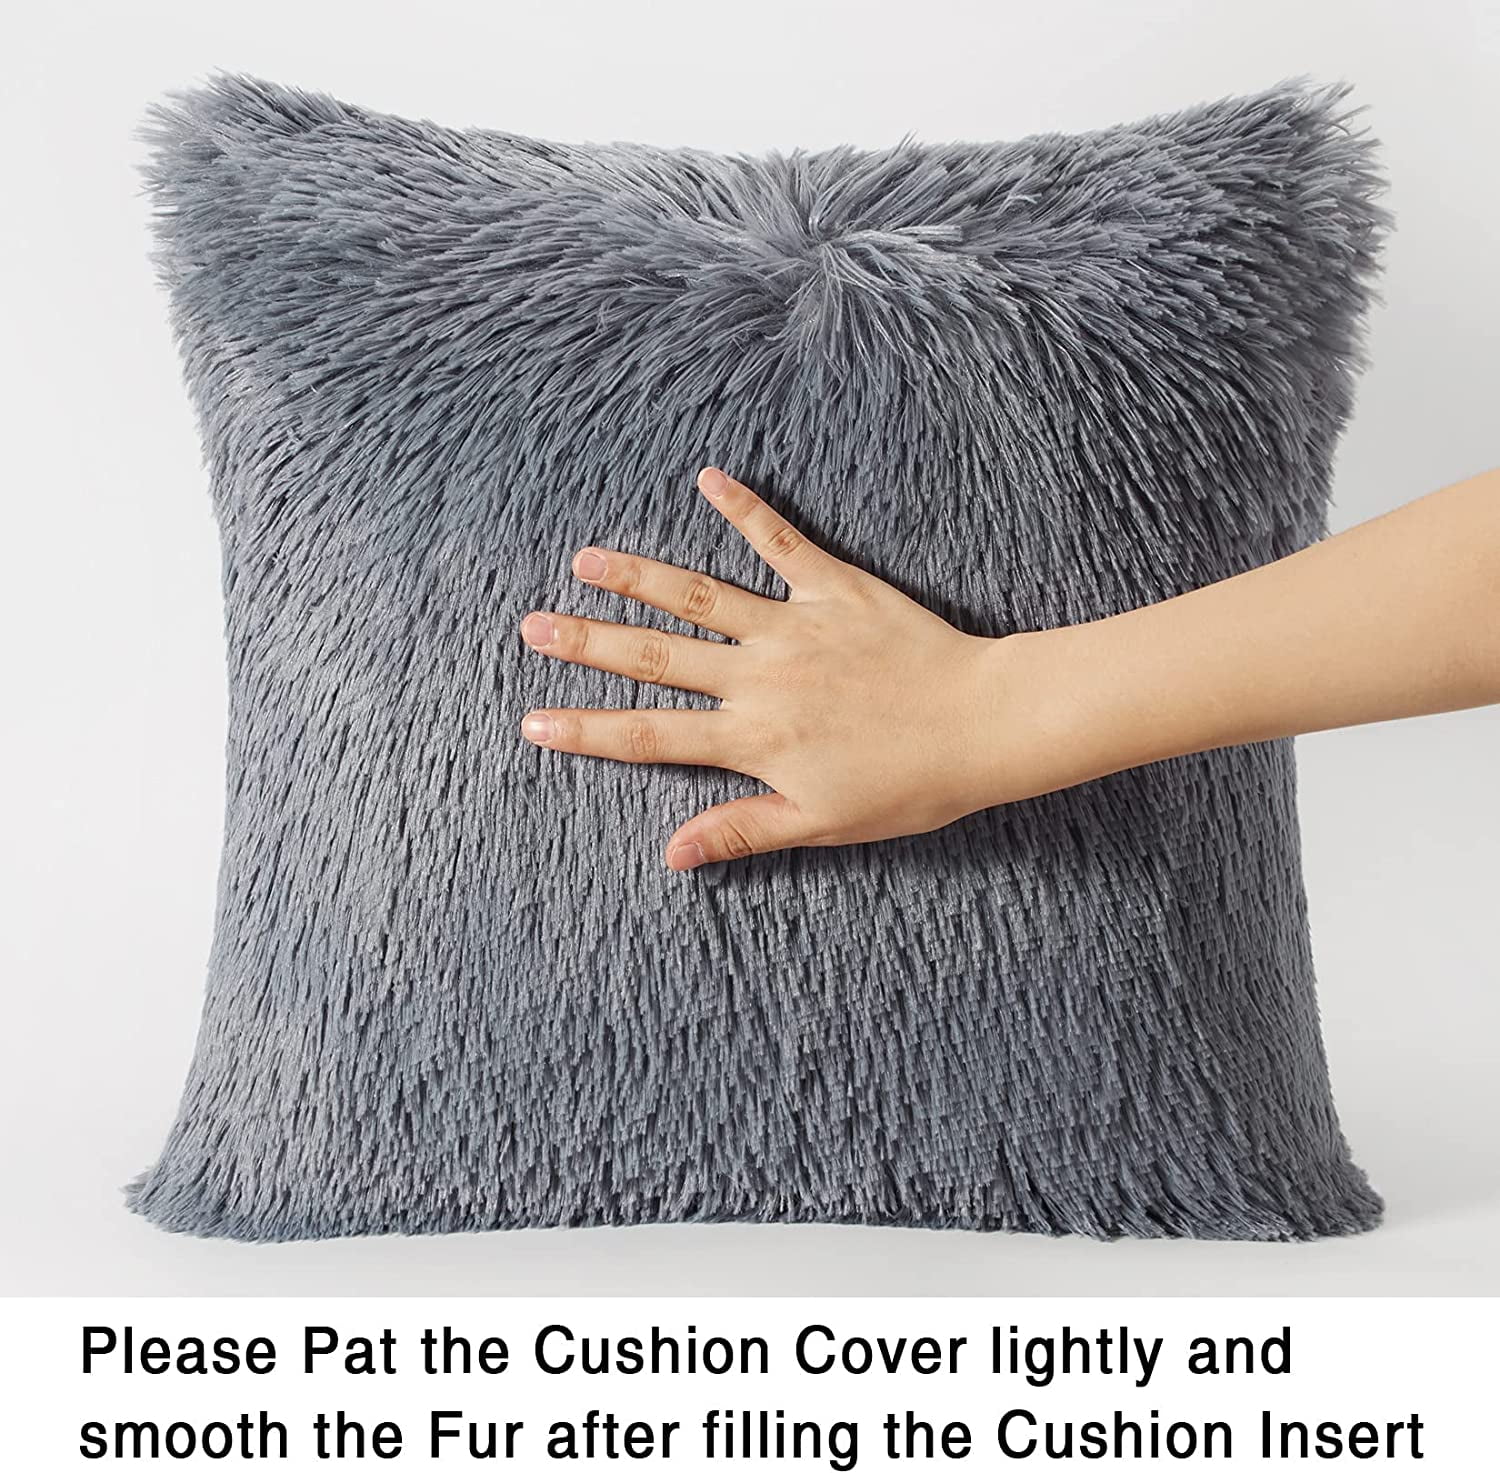 Pill2/4/6 cushion filler, microfiber of the highest quality,  hypoallergenic, fluffy, non-deformable, soft Adaptable to all covers.  Various sizes from 40x40cm to 60x60cm. - AliExpress